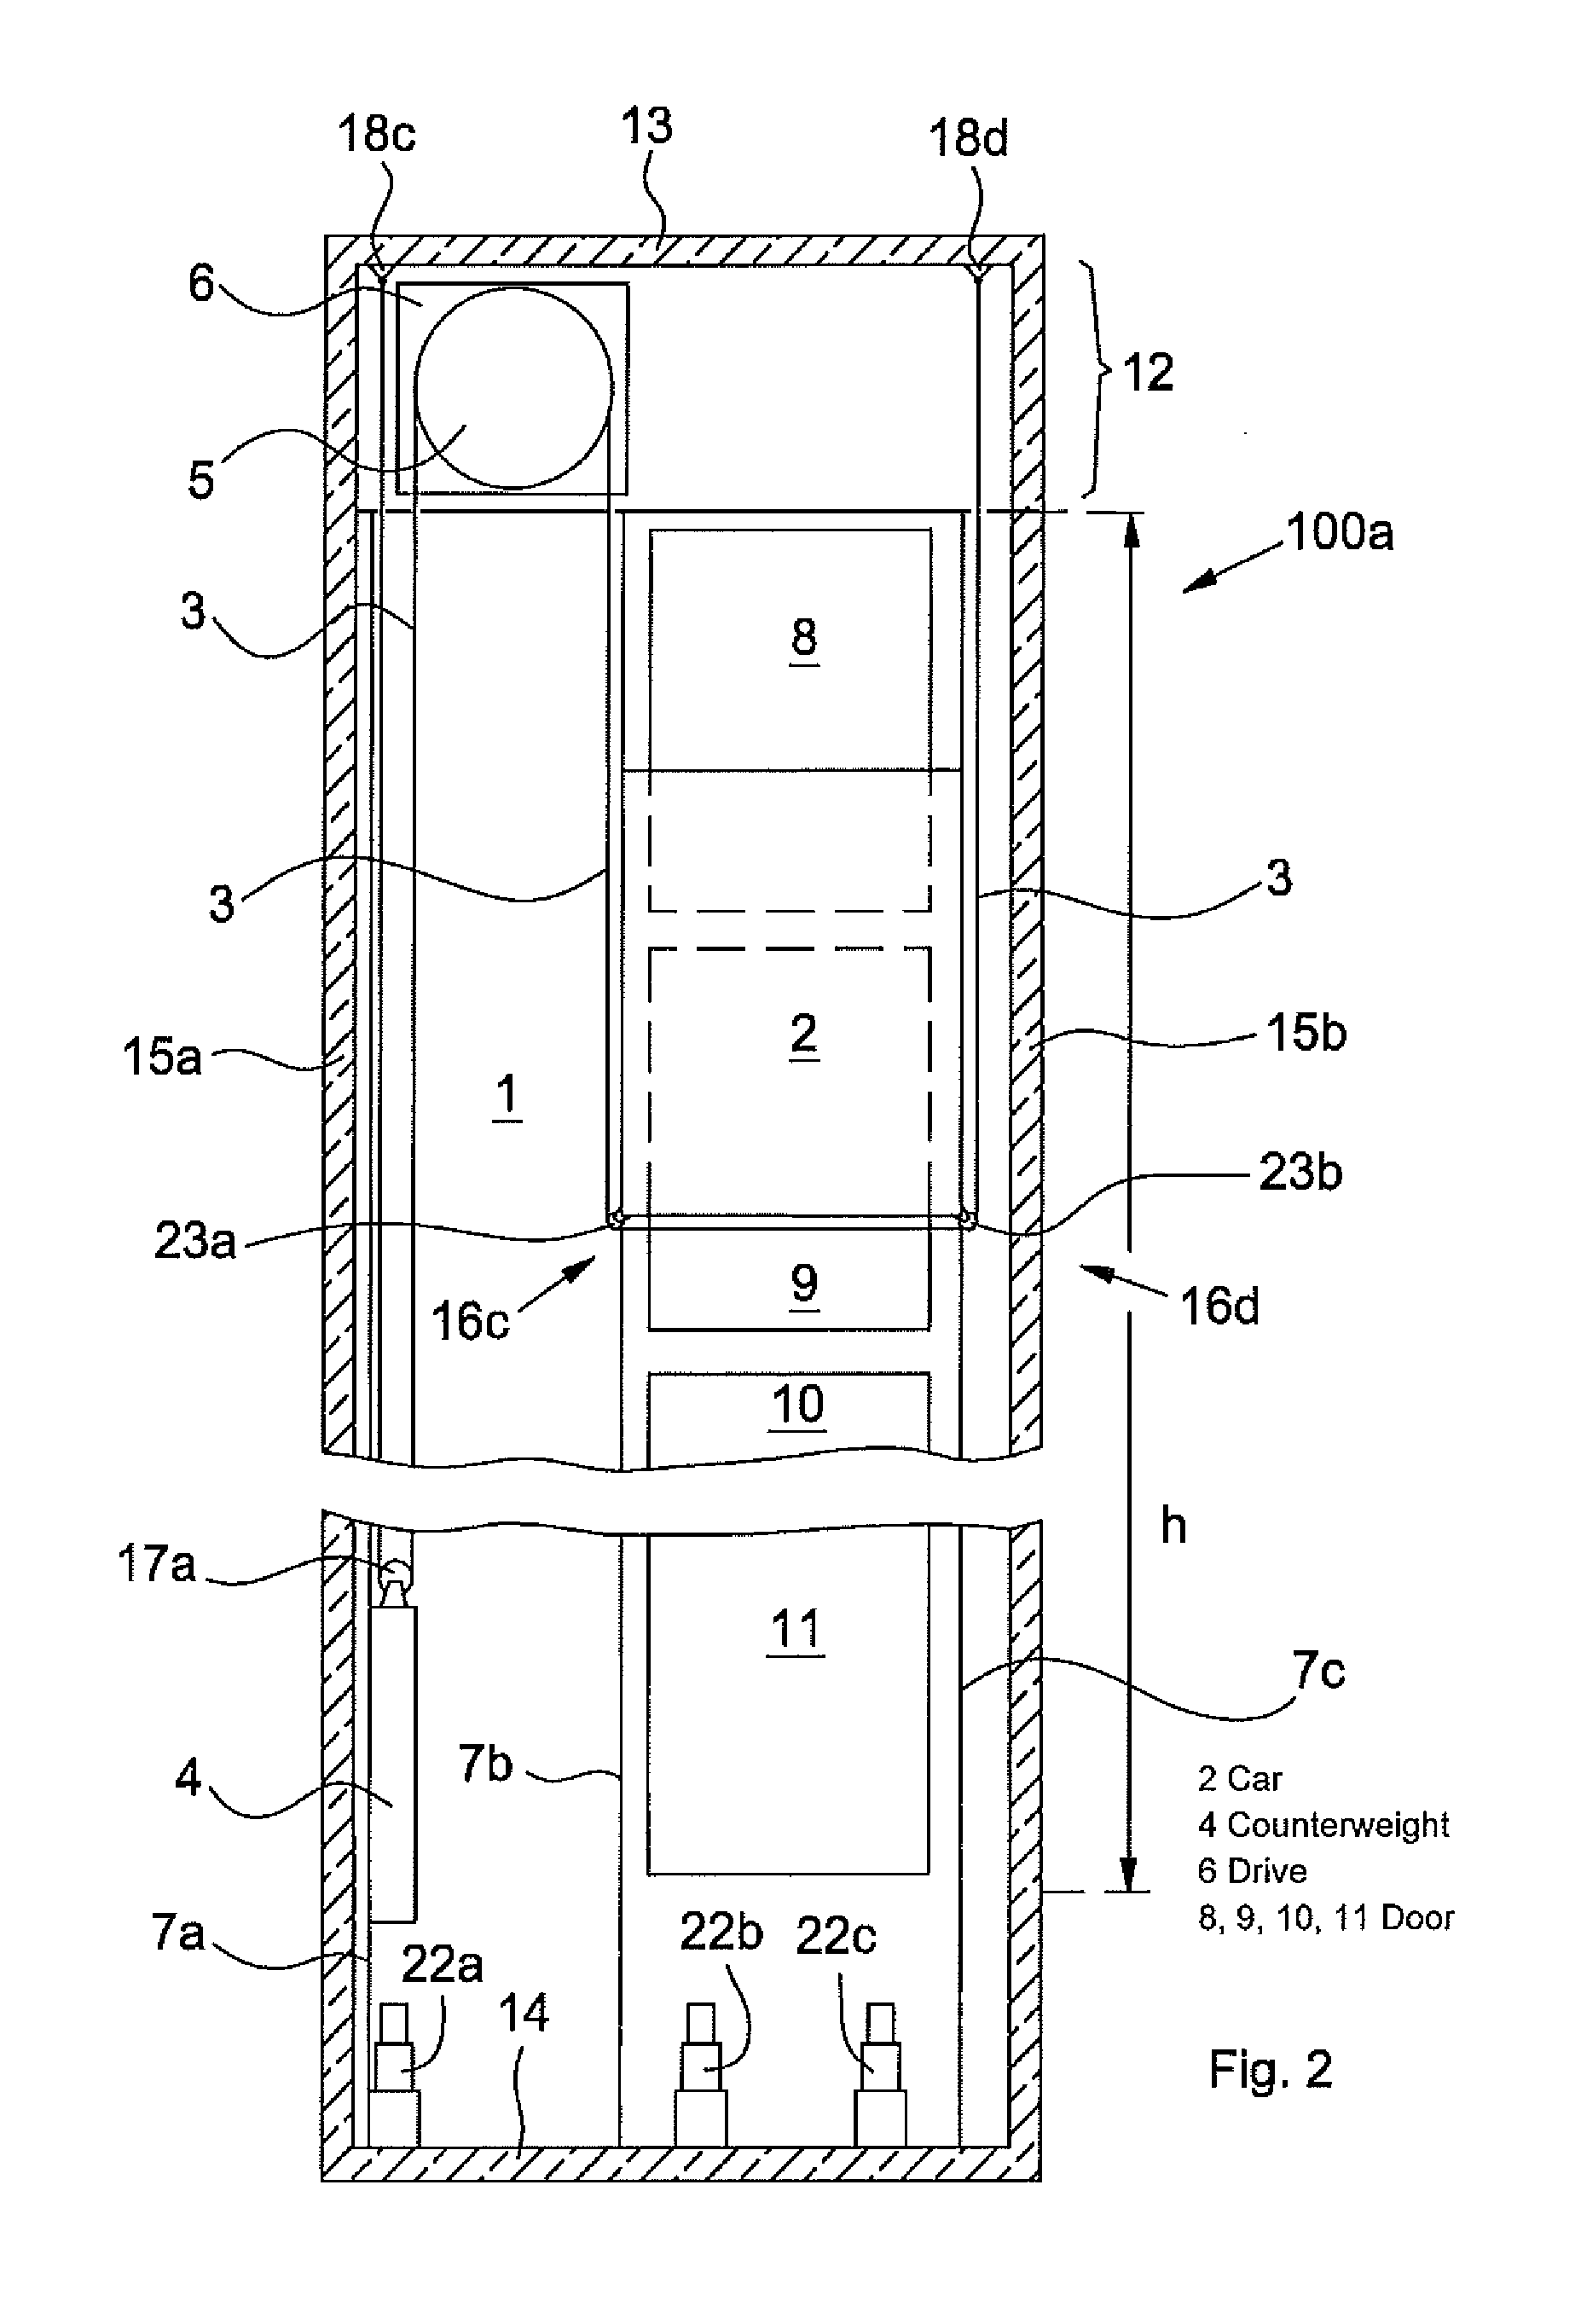 Operating state monitoring of support apparatus of an elevator system